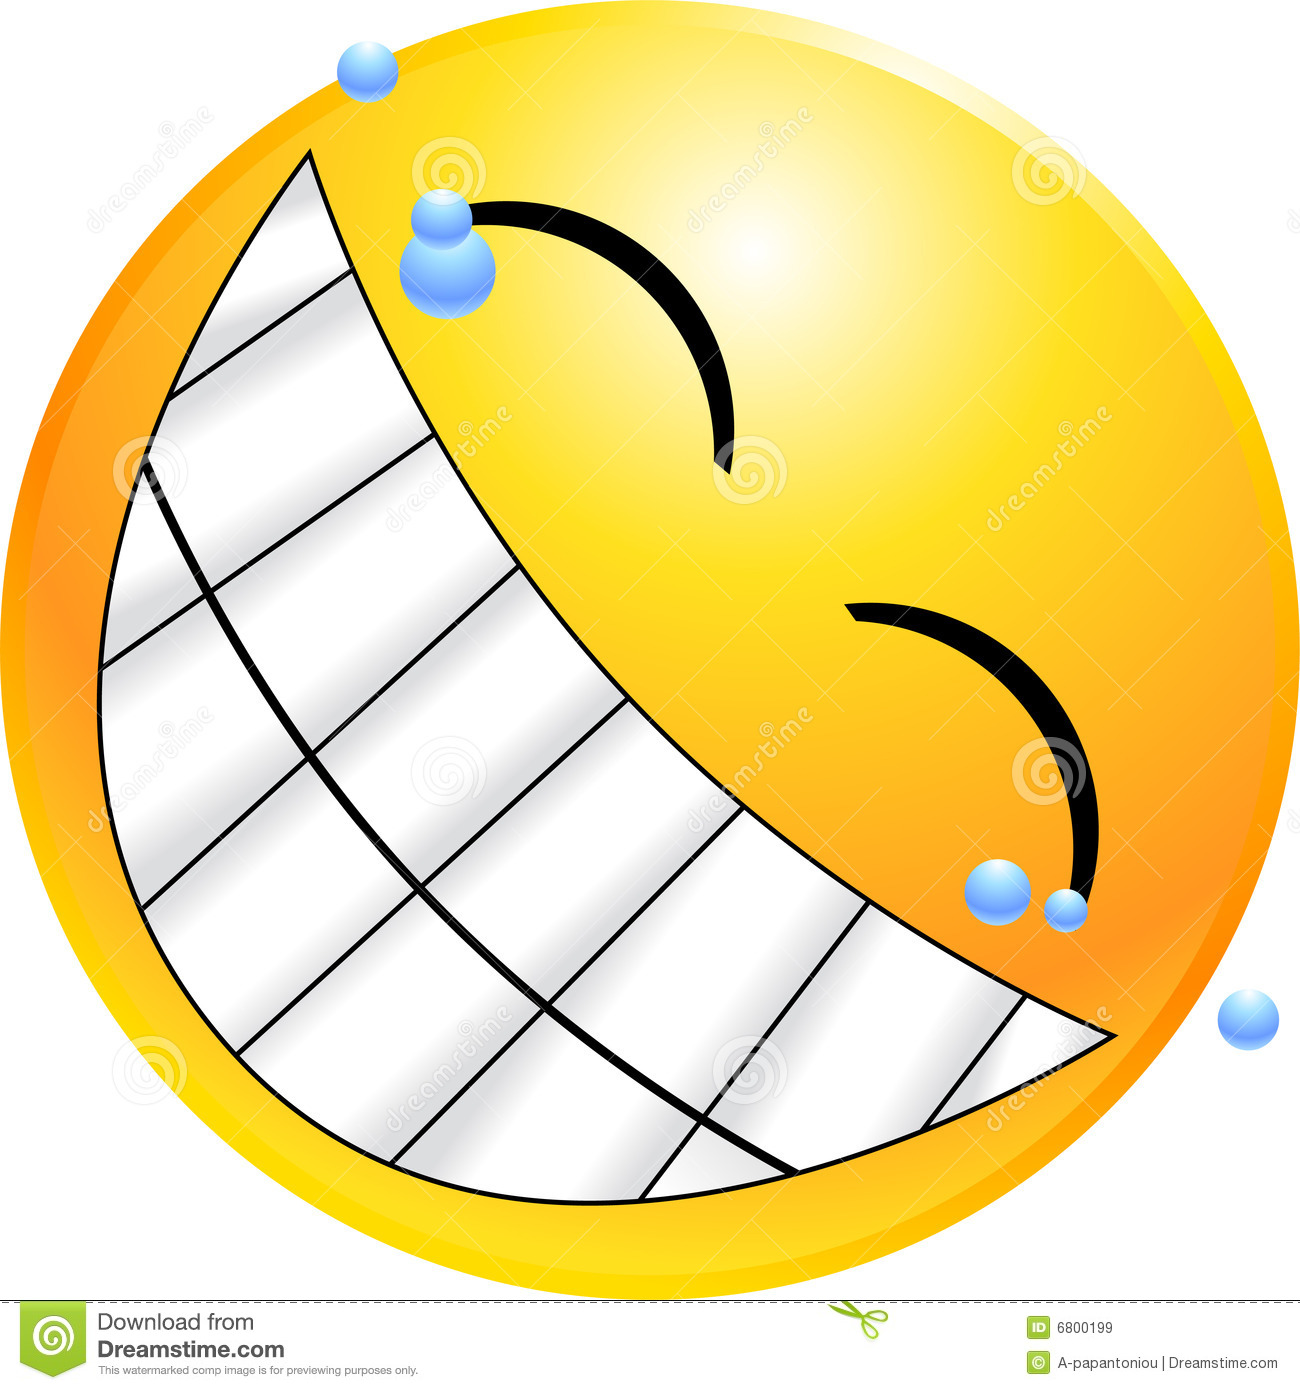 Emoticon Smiley Face Royalty Free Stock Images   Image  6800199